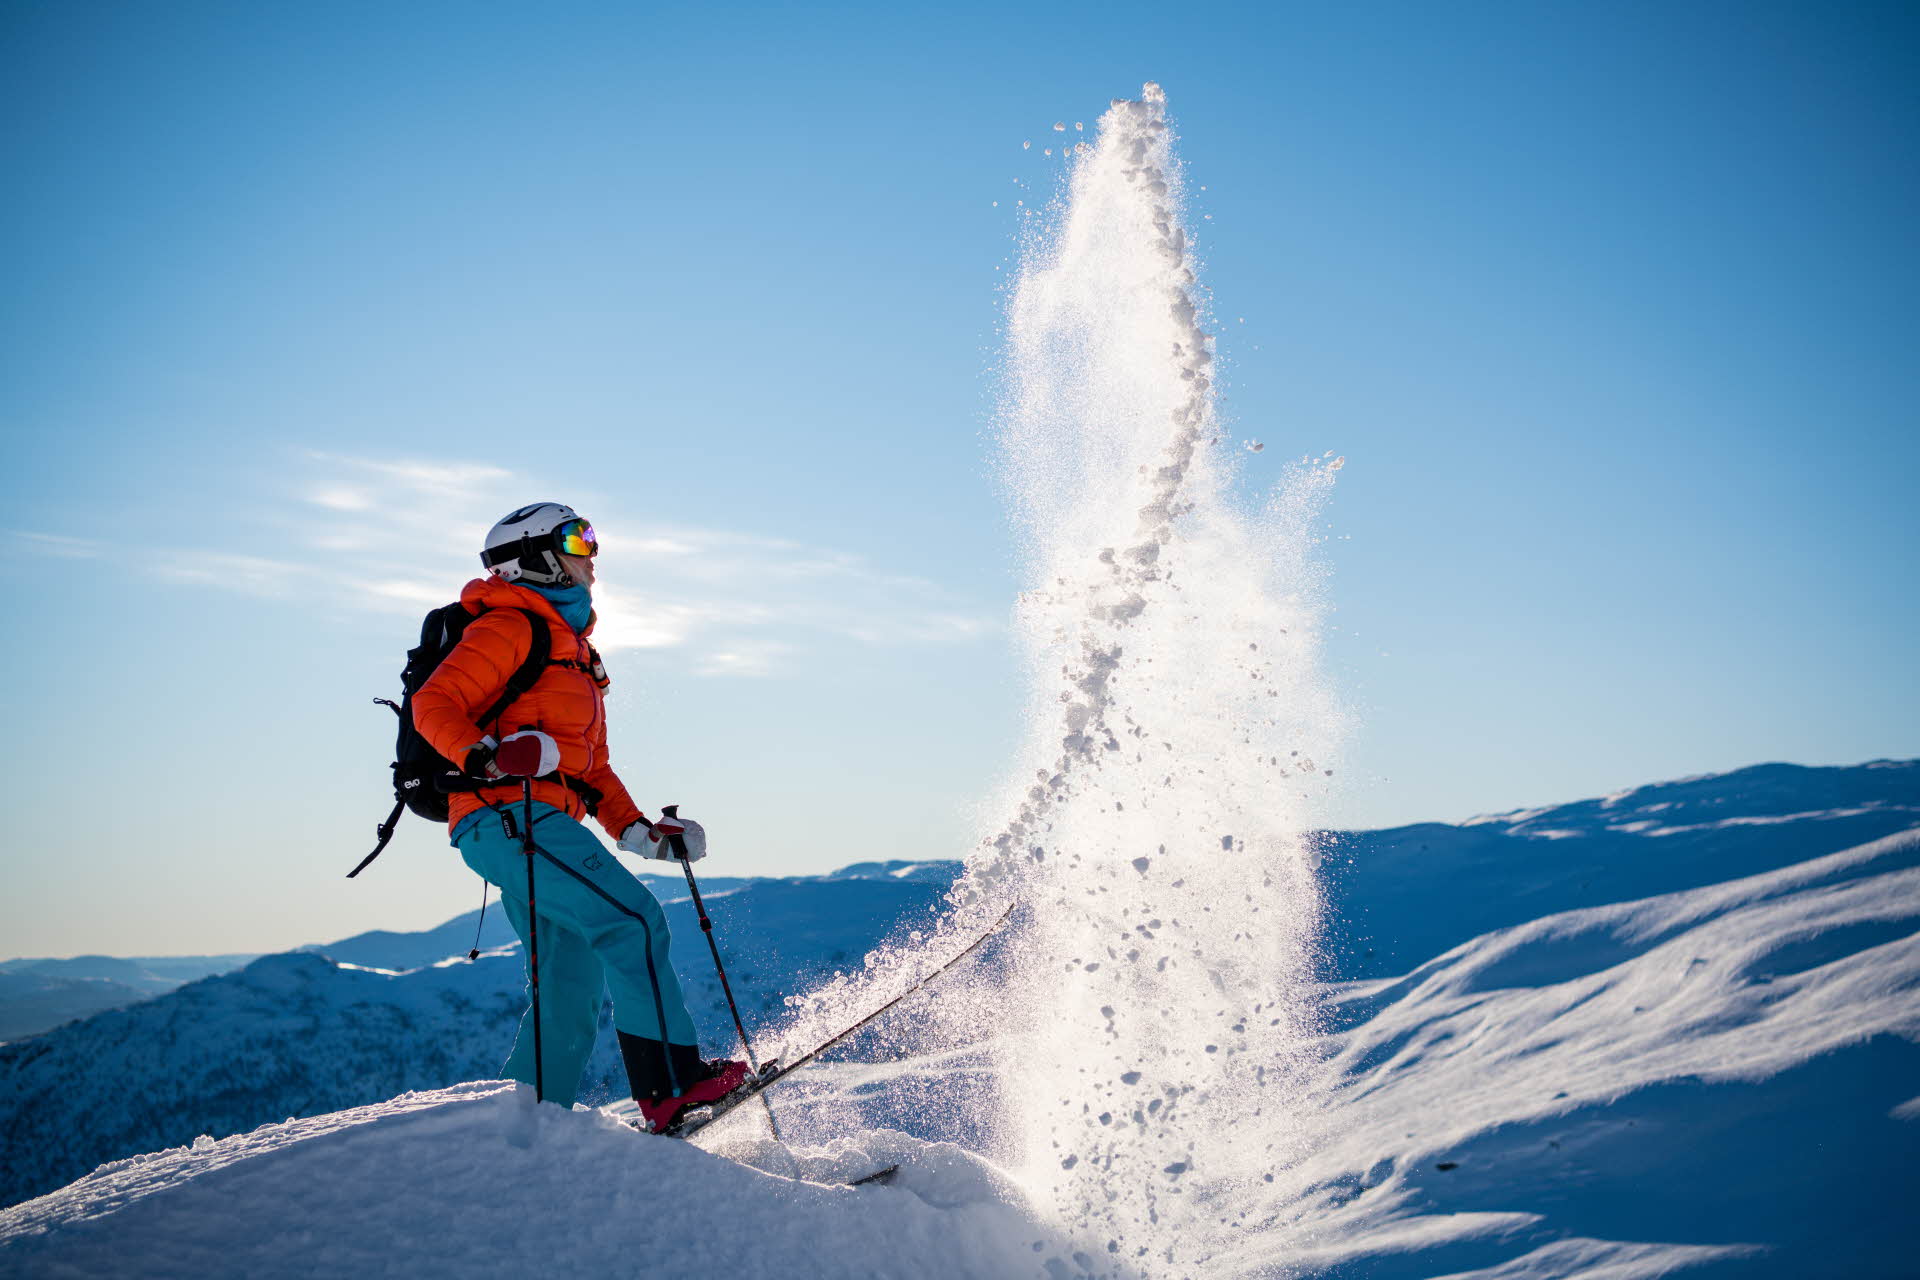 A skier in a red jacket, blue pants and white helmet flips powder snow in the air with a ski on top of a mountain